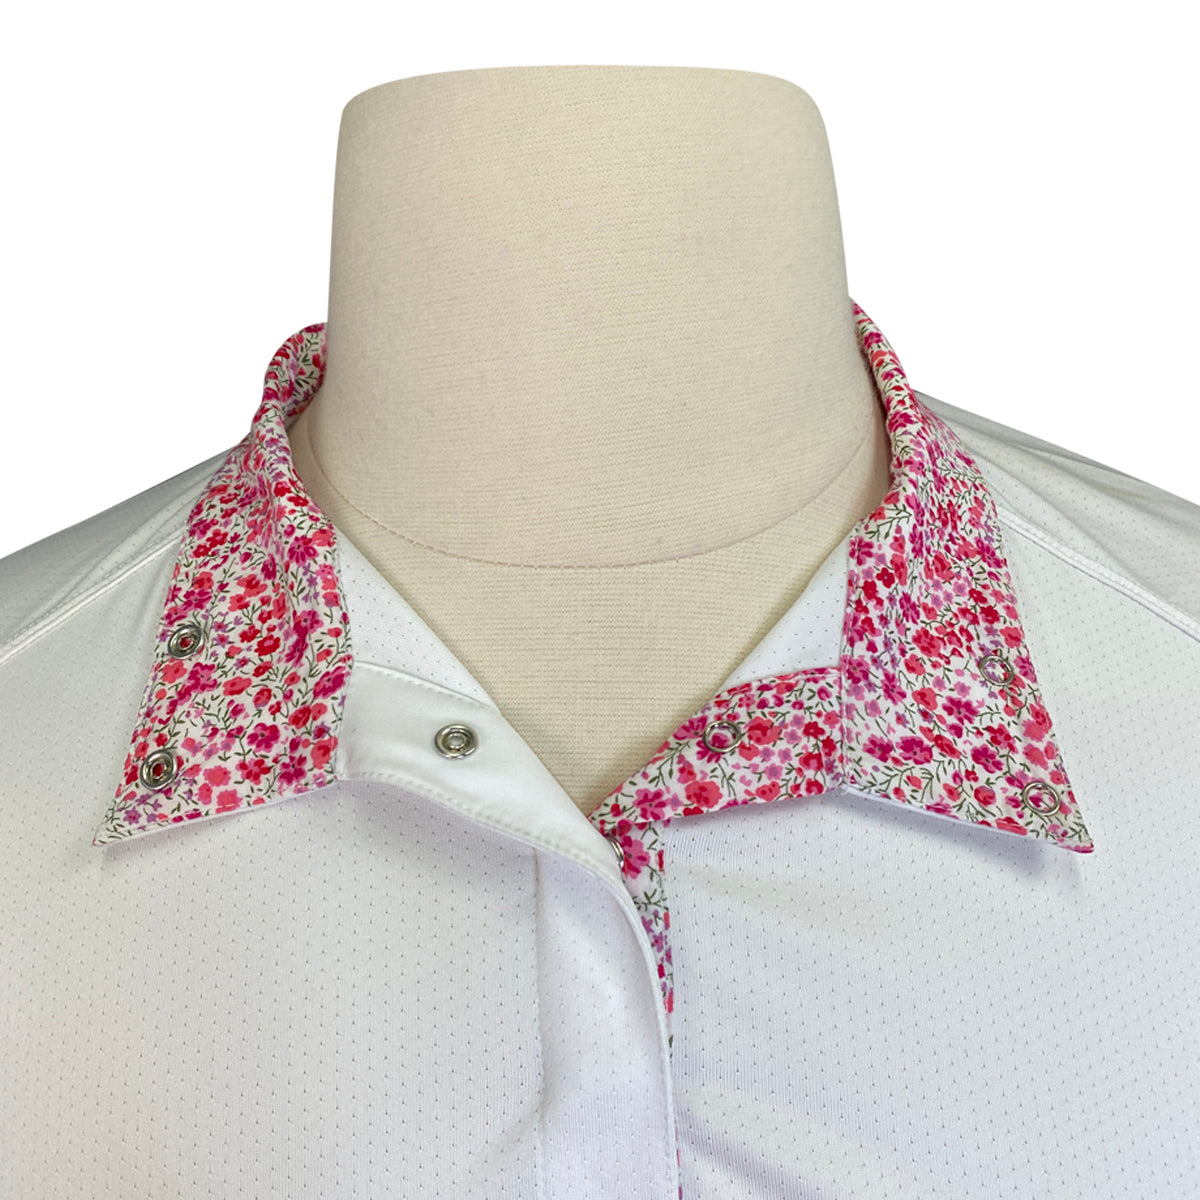 Dover Saddlery CoolBlast Show Shirt in White/Pink Flowers